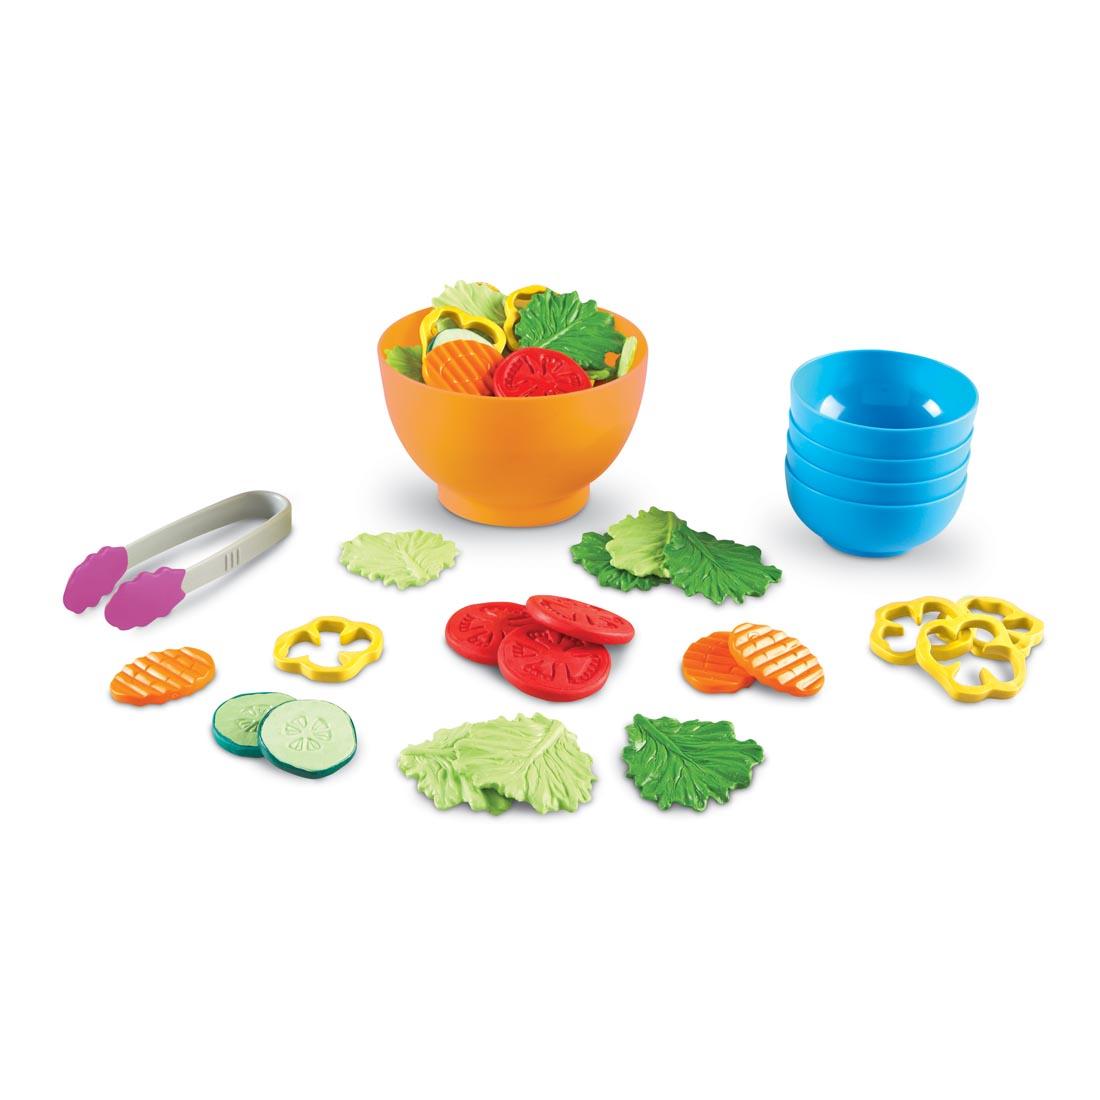 tongs and bowls with play food such as lettuce, sliced tomatoes, sliced carrots, sliced cucumbers and more